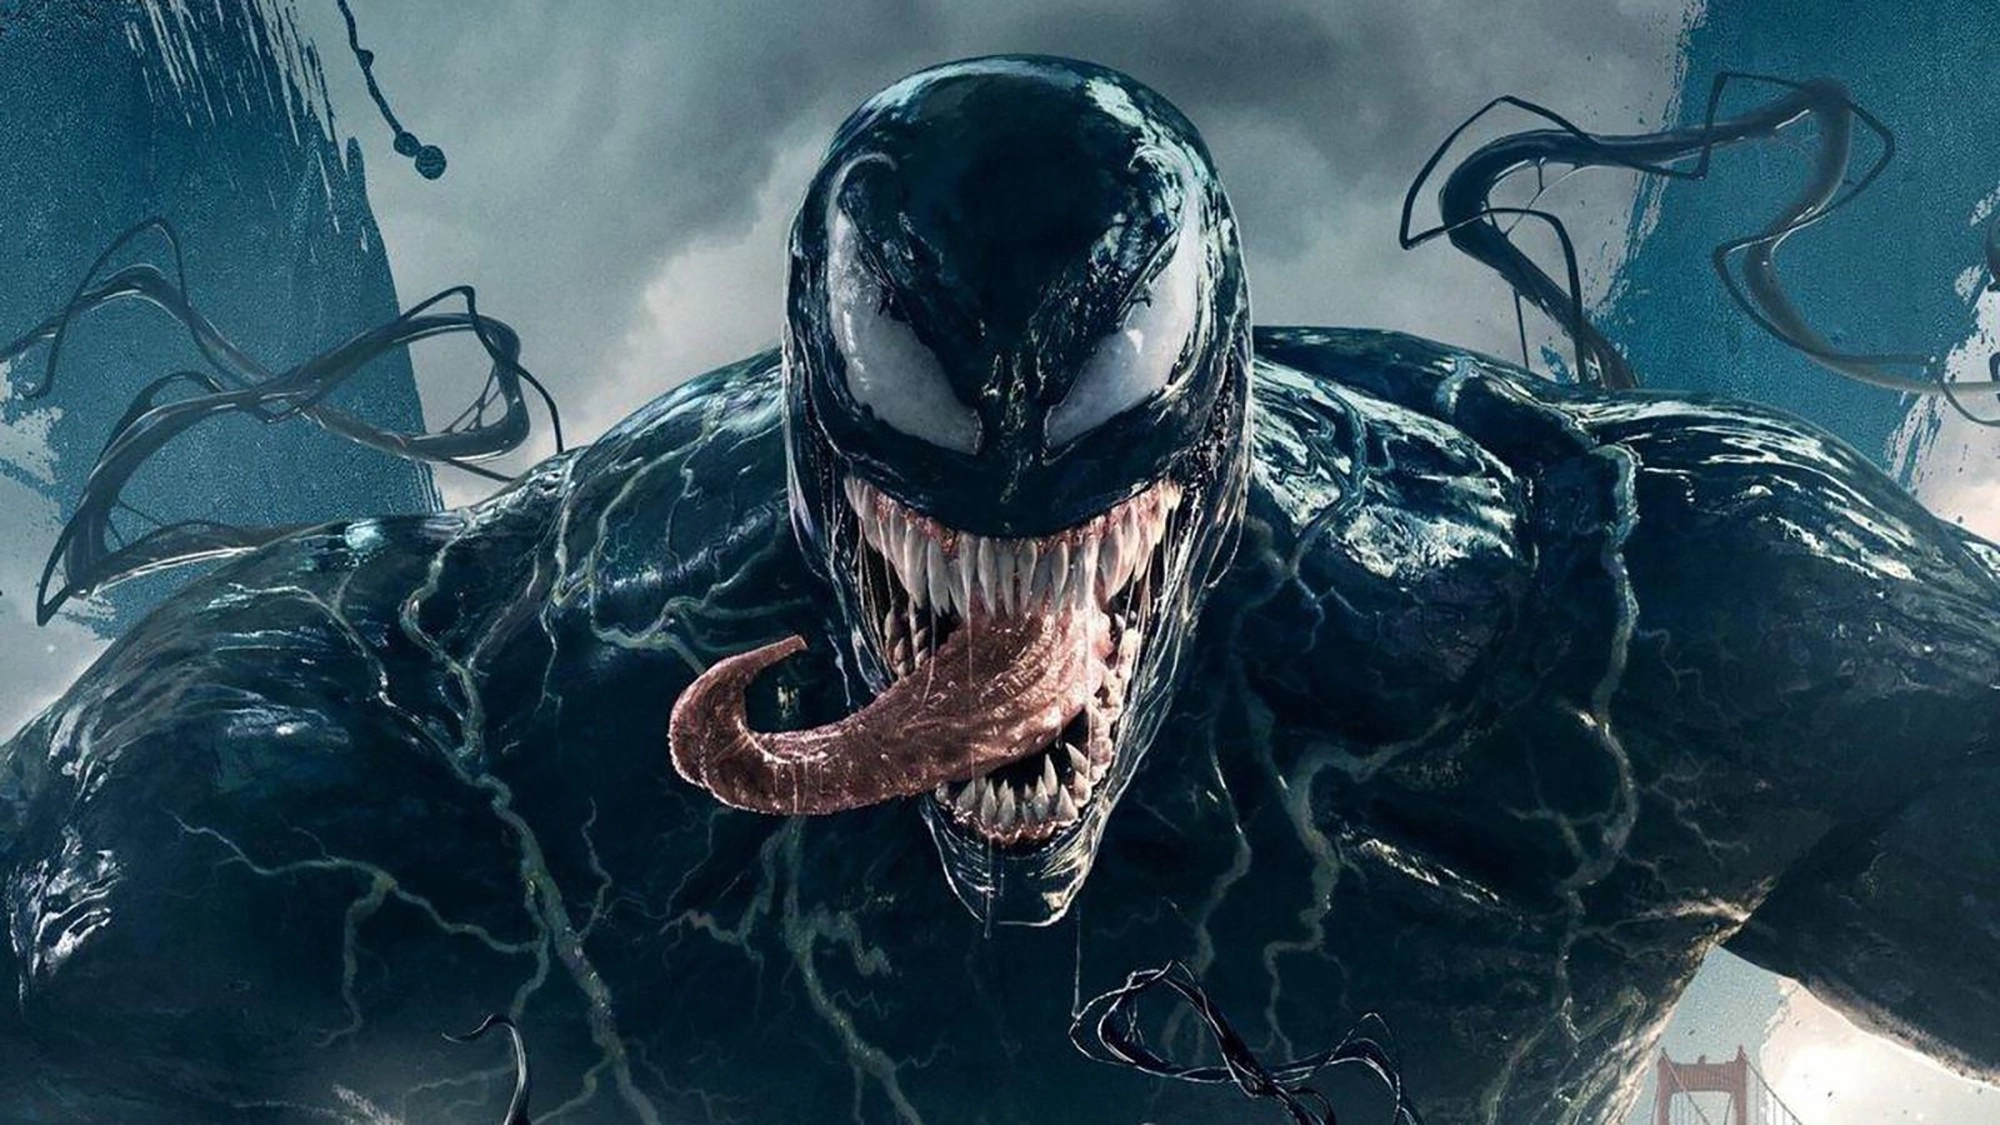 Could We See Agent Venom In The Upcoming Spider-Man Movies